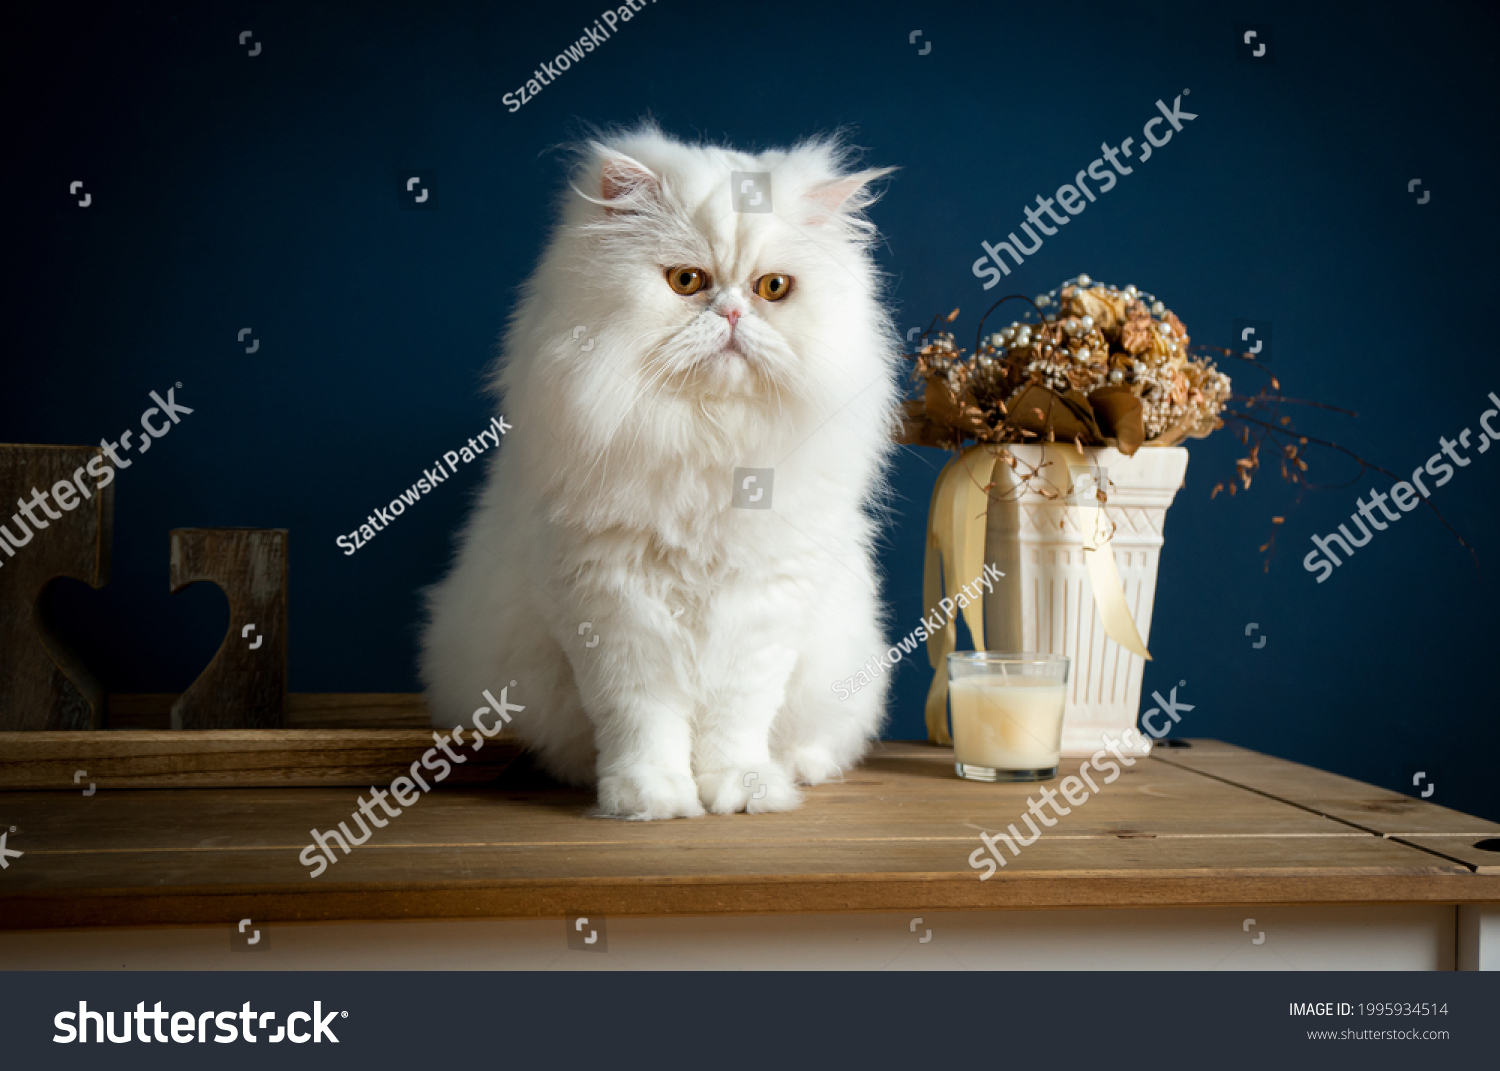 A white Persian cat sitting on a rustic table. You see a blue background and some flowers and a candle. The cat has brown eyes. #1995934514